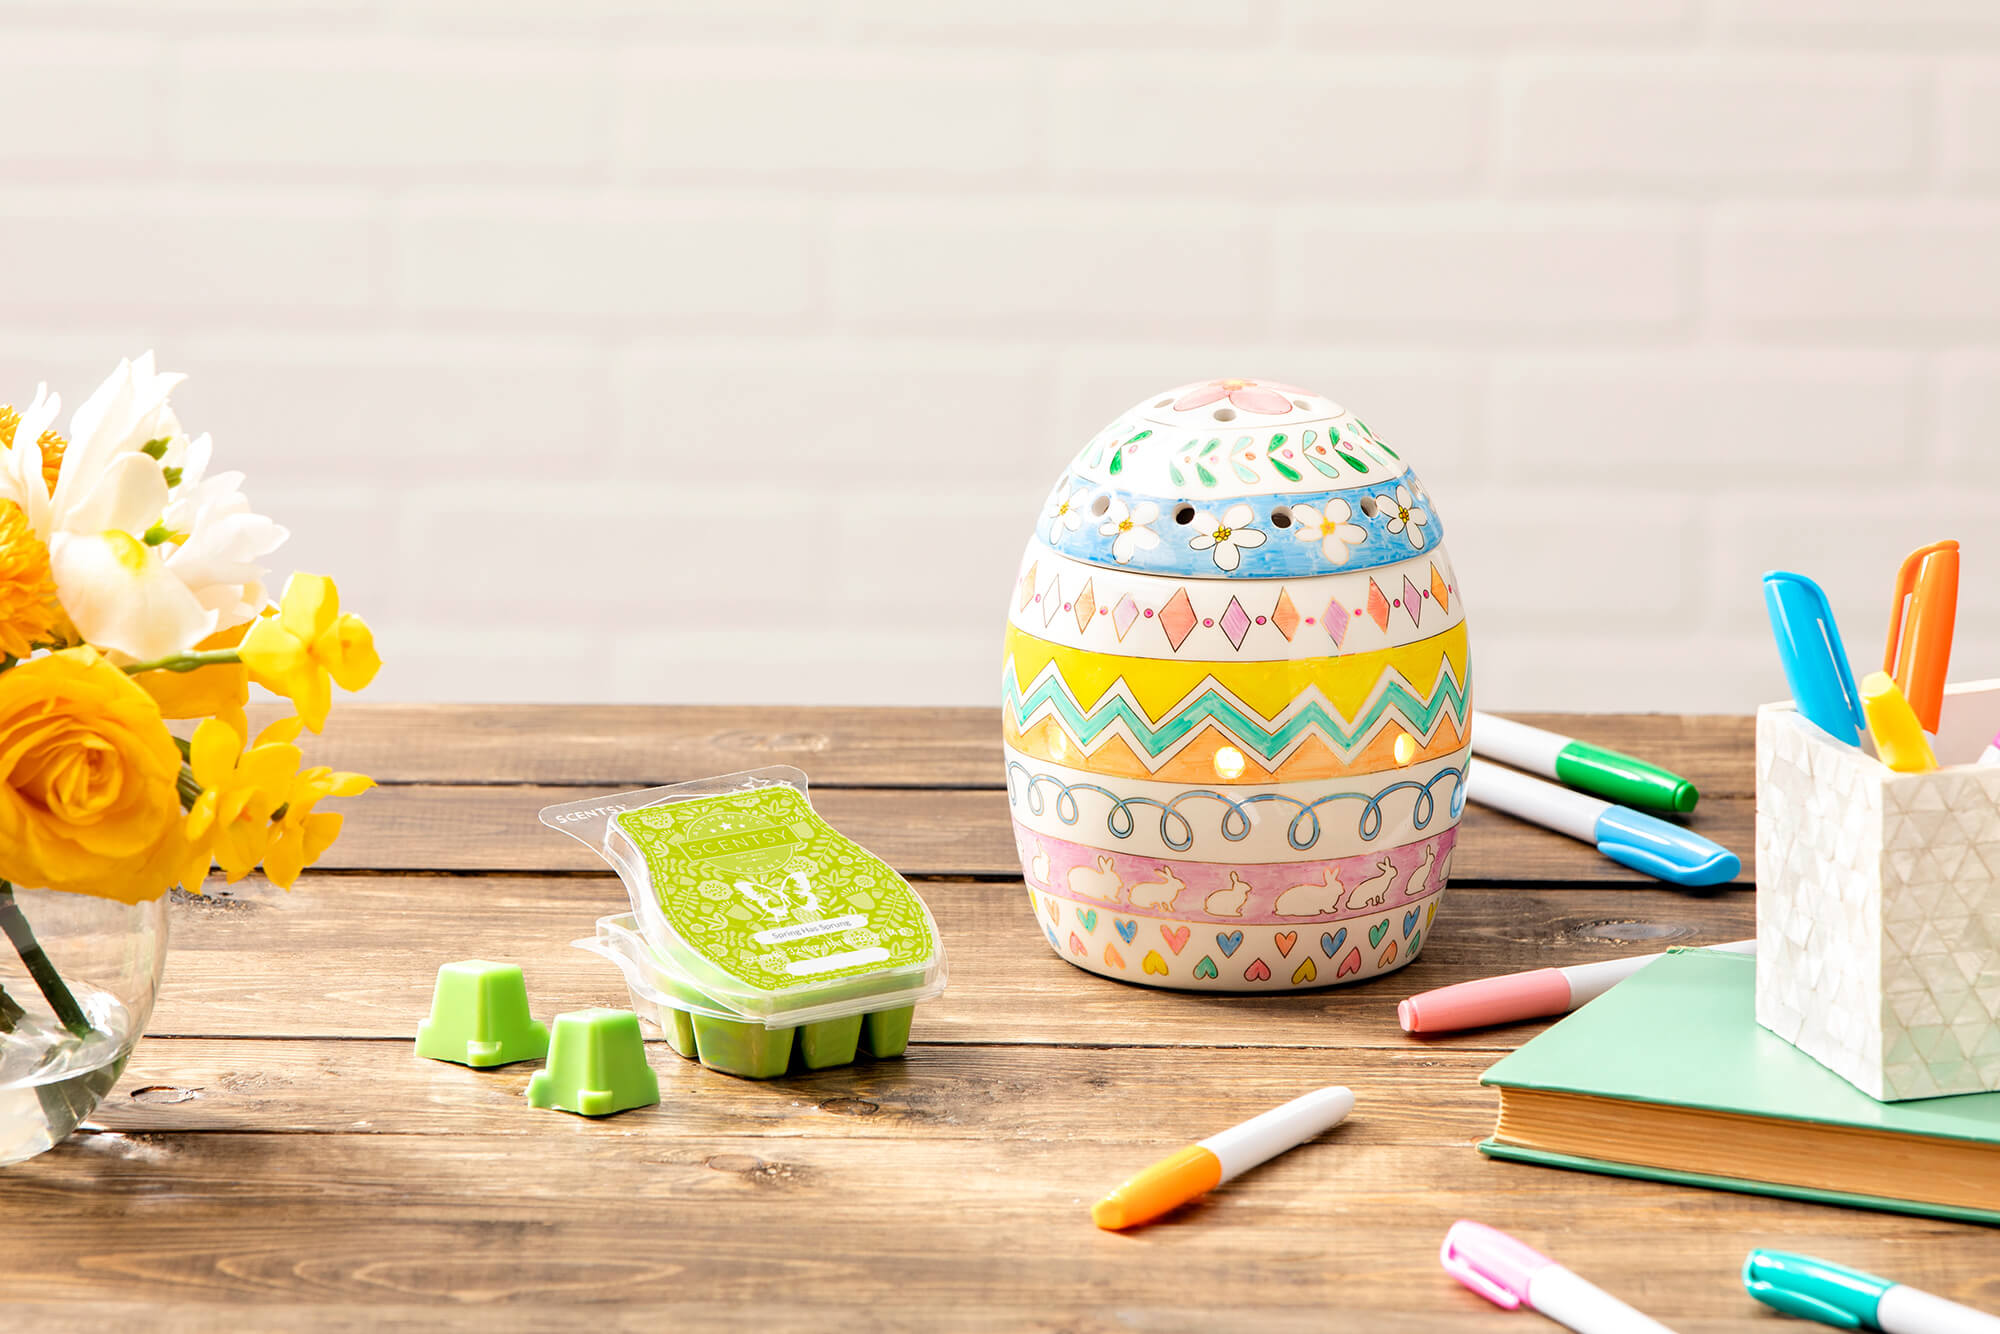 Try these fun Easter ideas for kids!